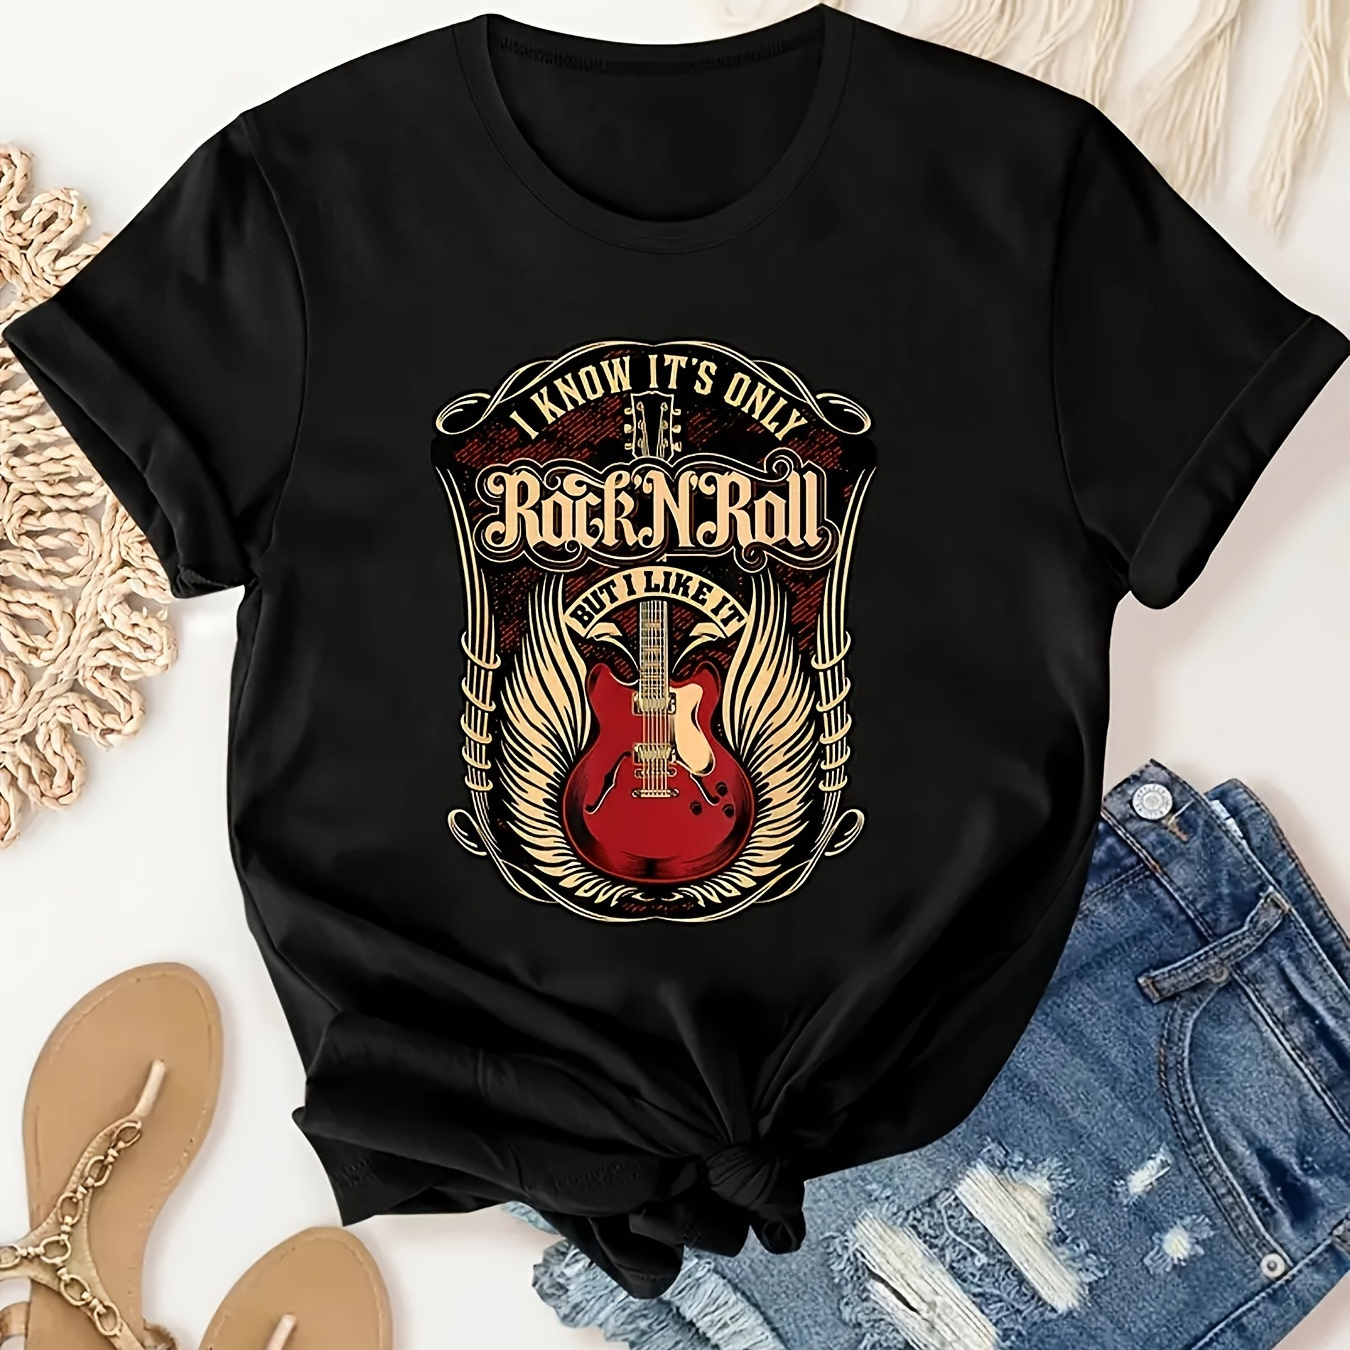 

Rock & Roll Print T-shirt, Short Sleeve Crew Neck Casual Top For Summer & Spring, Women's Clothing